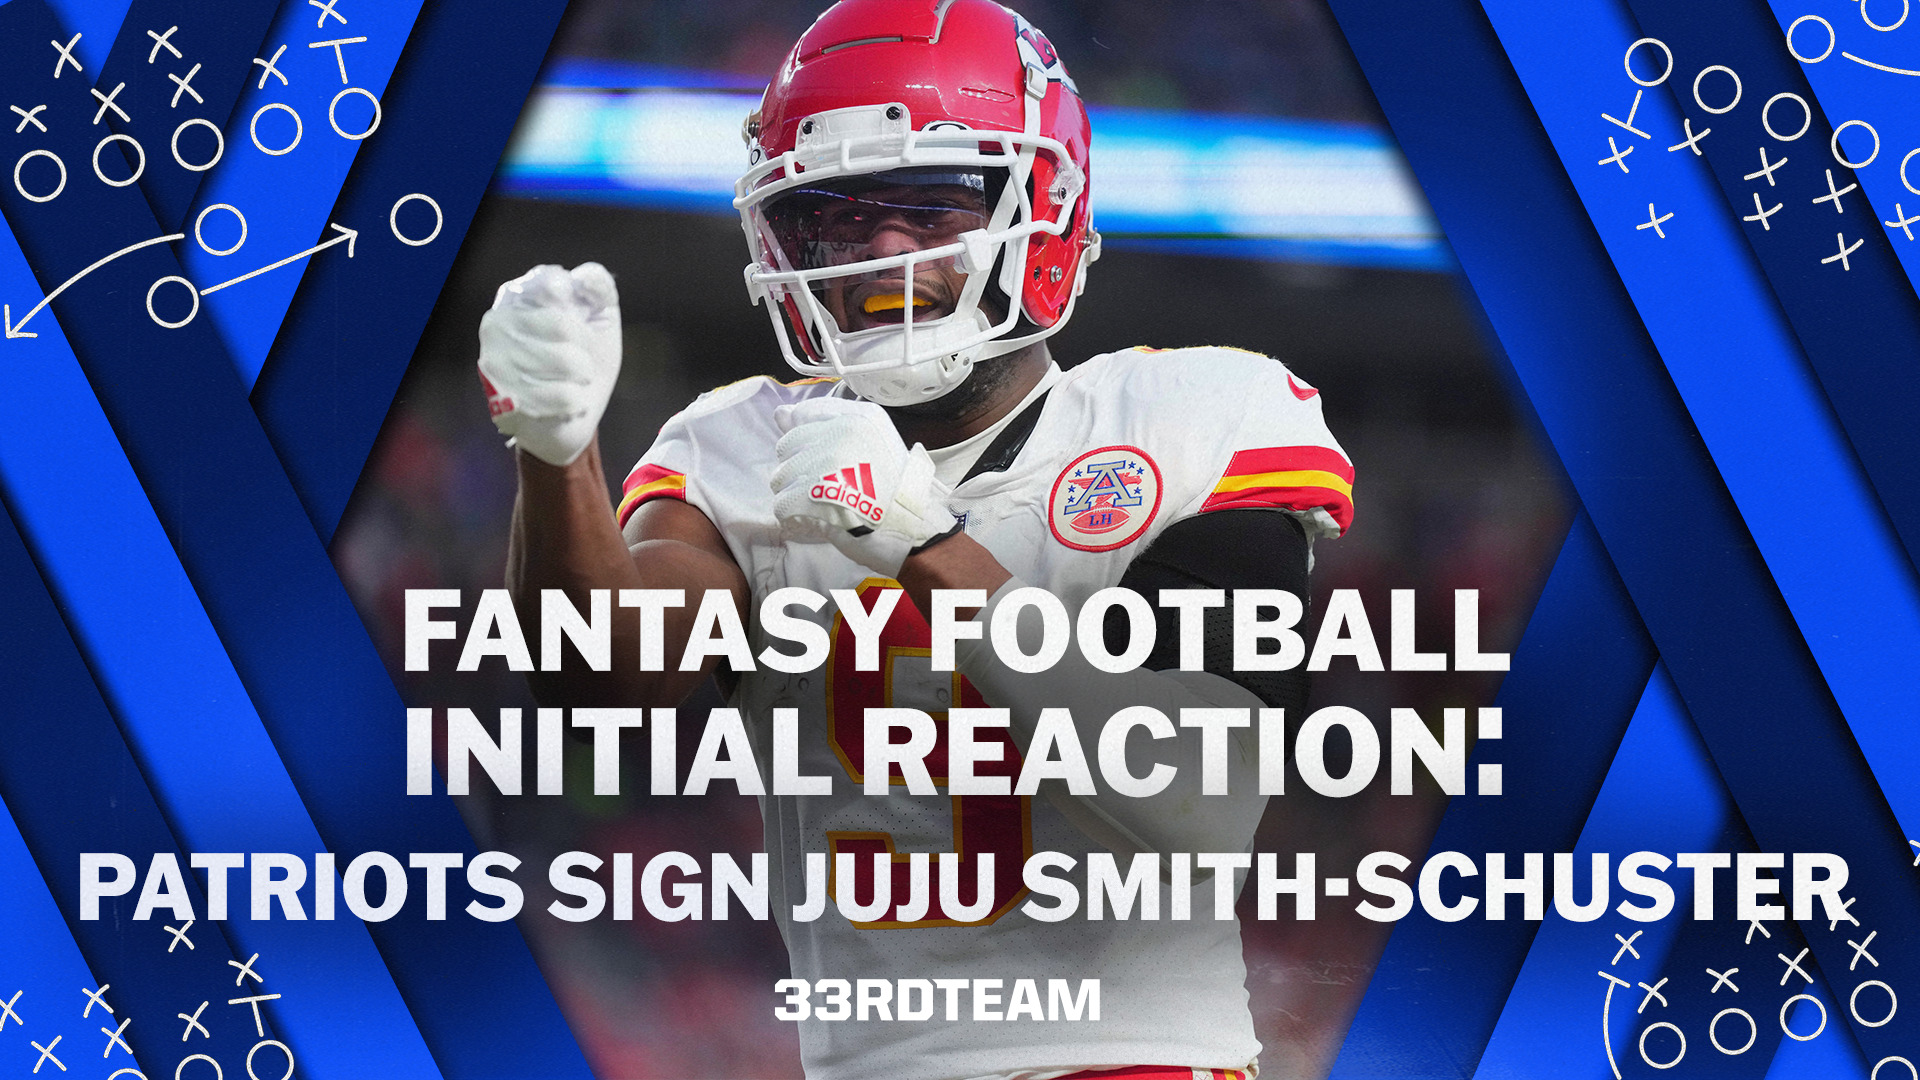 Fantasy Football Reaction: JuJu Smith-Schuster, Patriots Agree to Deal